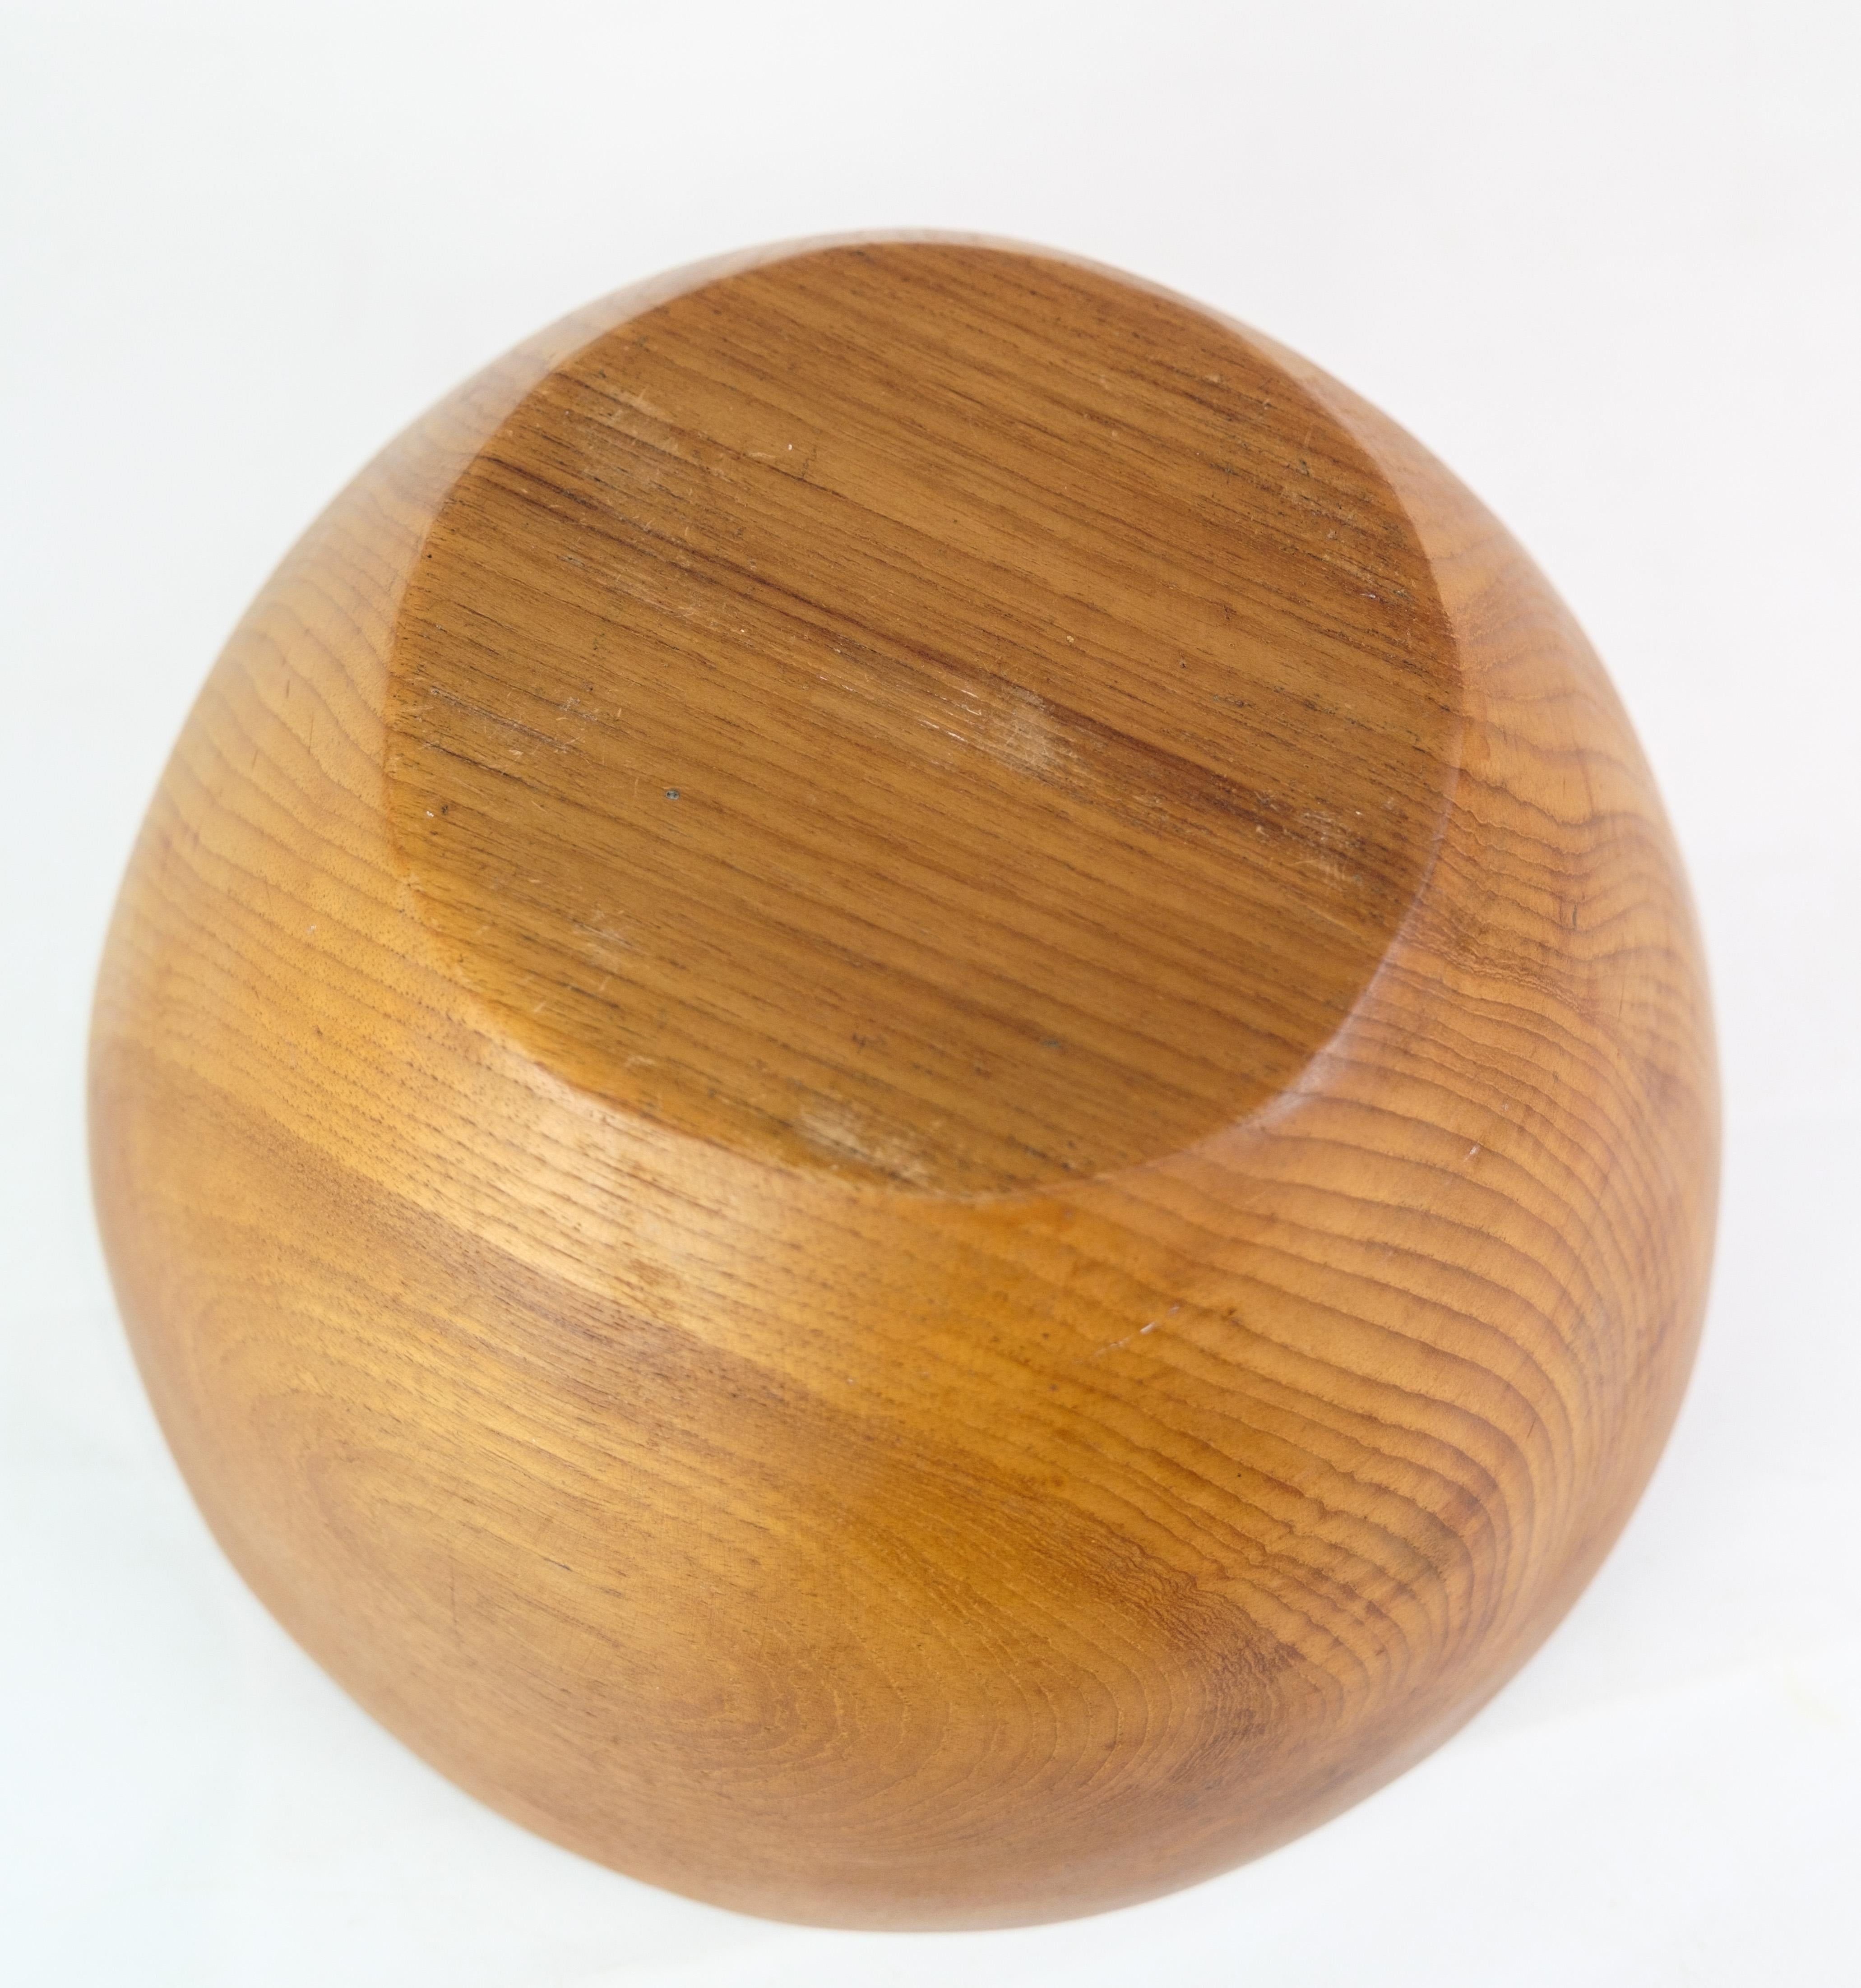 The large teak bowl, crafted in Denmark during the 1960s, exemplifies the era's renowned Danish design principles. This piece showcases the mastery of form and function, with its smooth curves and warm wood grain adding a touch of natural elegance